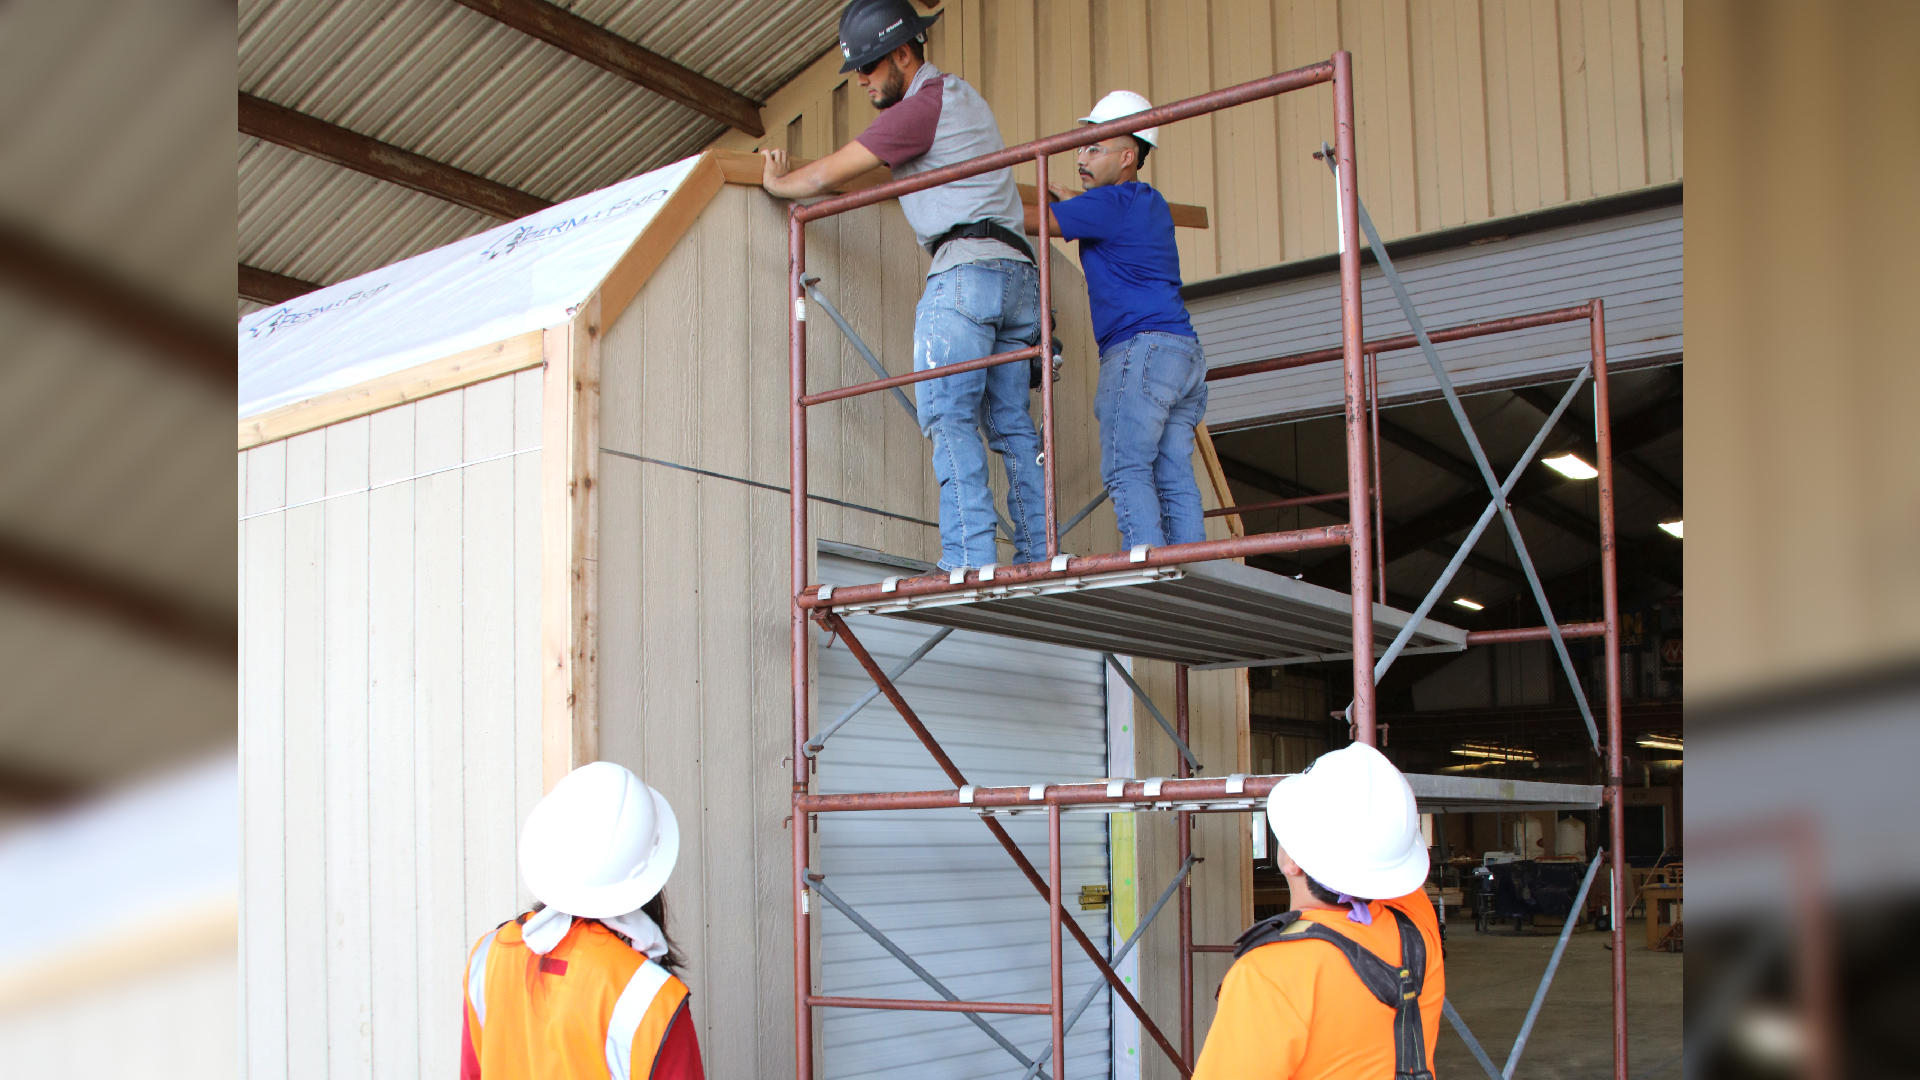 TSTC’s Building Construction Technology instructor emphasizes skills needed for success